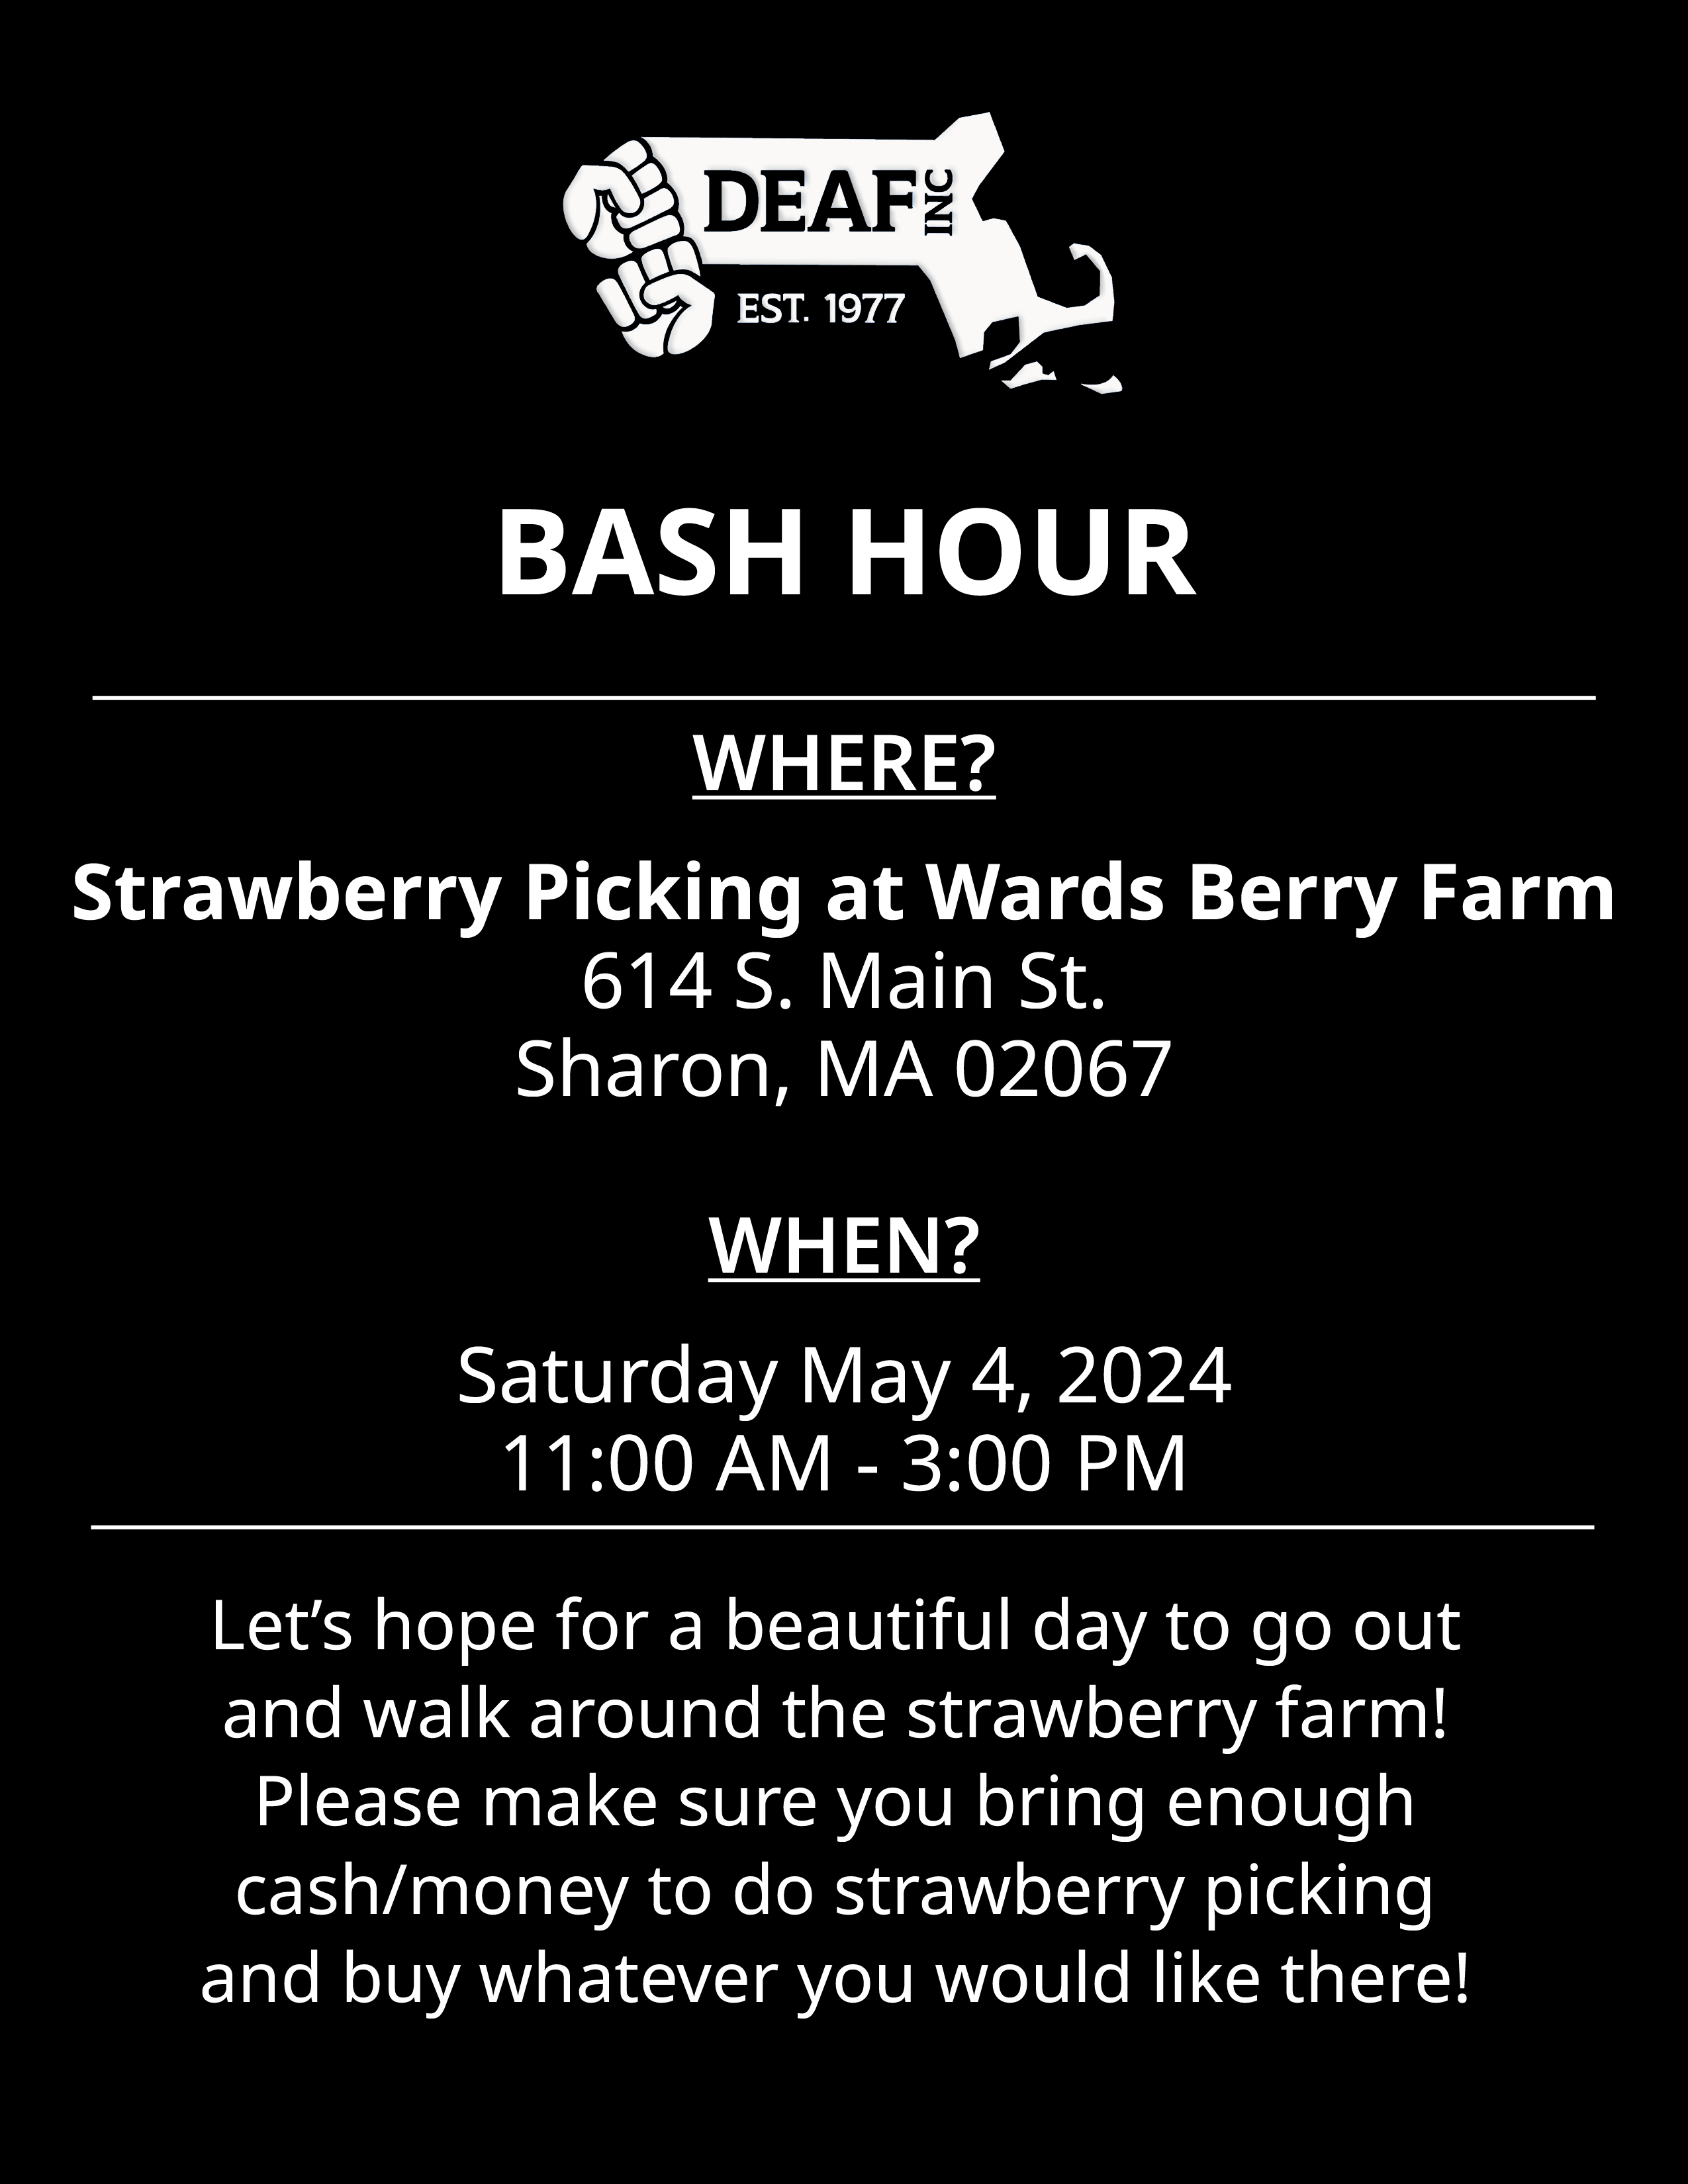 Image Description: Black and white BASH HOUR flyer with white DEAF, Inc. logo at the top. WHERE? Strawberry Picking at Wards Berry Farm. 614 S. Main St. Sharon, MA 02067. WHEN? Saturday, May 4, 2024. 11:00 AM - 3:00 PM. Lets hope for a beautiful day to go out and walk around the strawberry farm! Please make sure you bring enough cash/money to do strawberry picking and buy whatever you would like there!